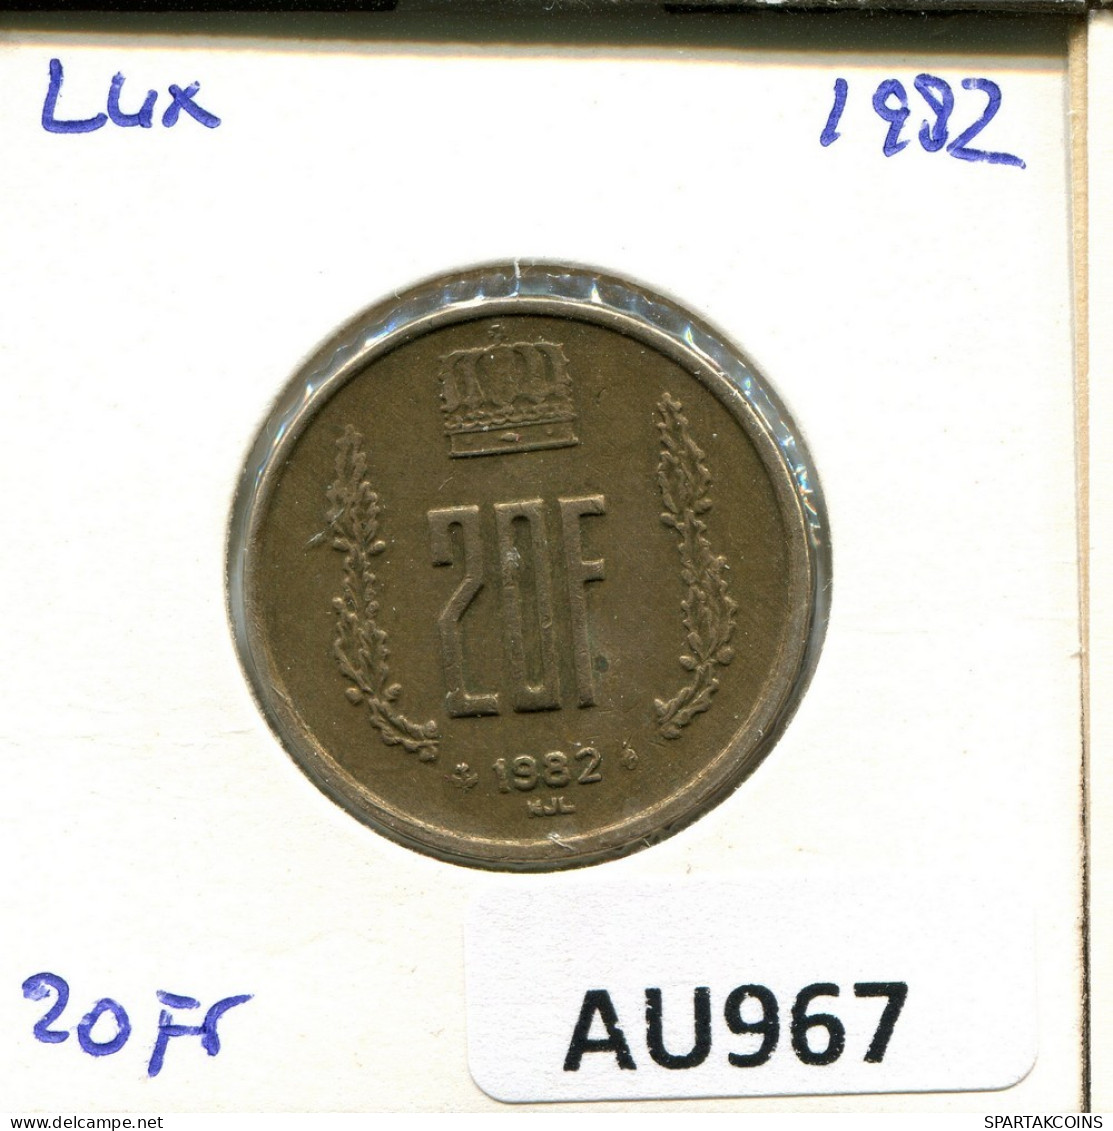 20 FRANCS 1982 LUXEMBOURG Coin #AU967.U.A - Luxemburgo